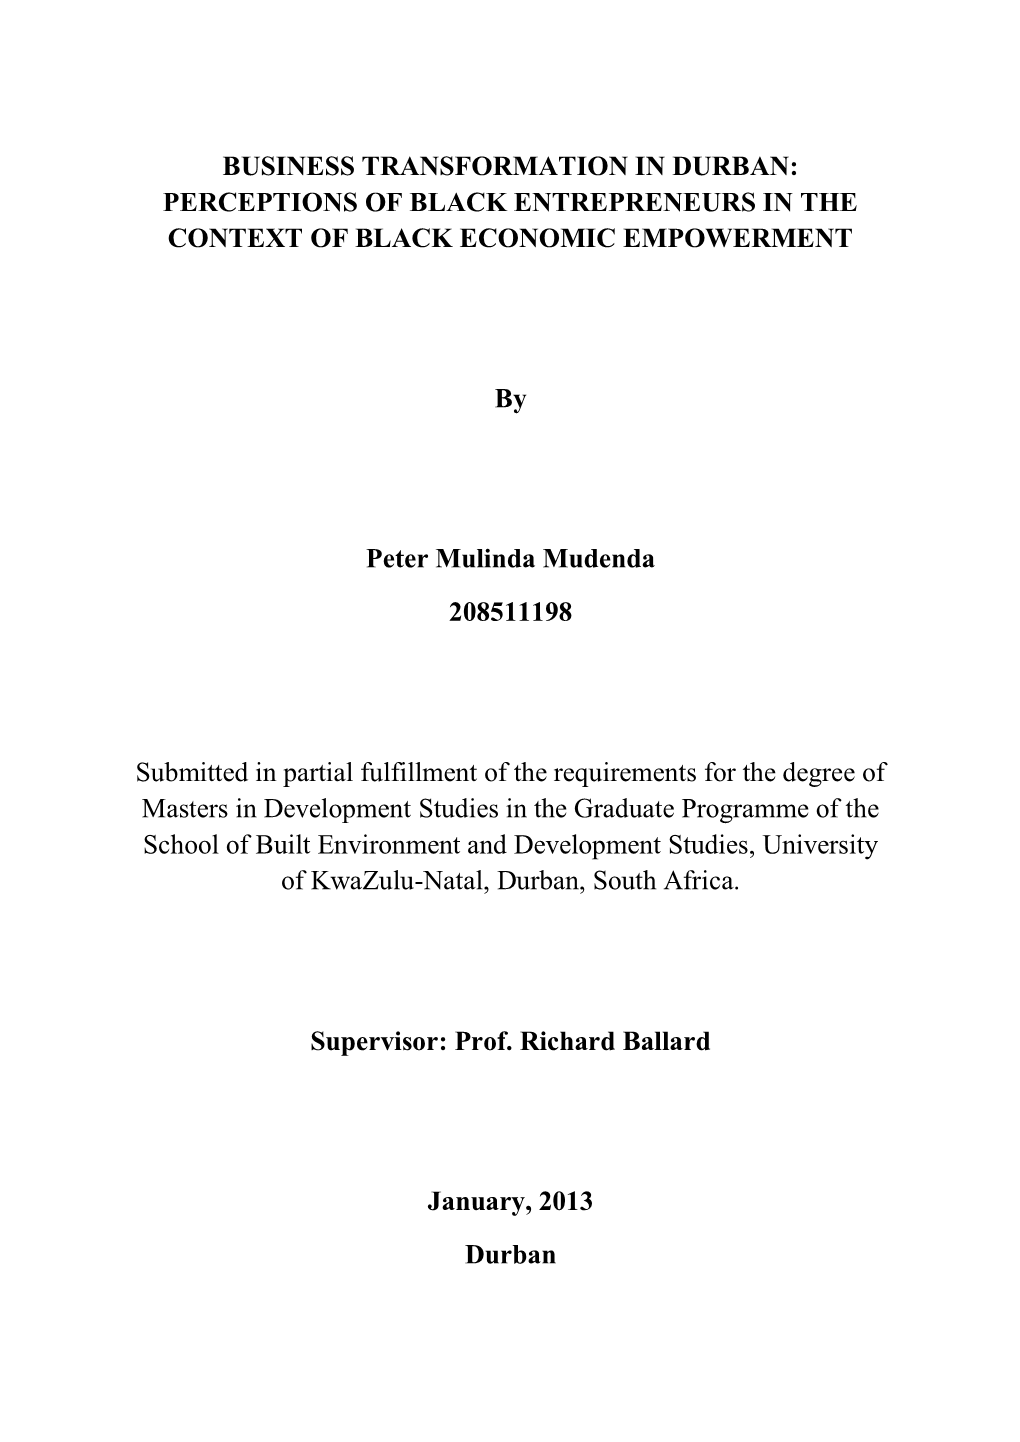 BUSINESS TRANSFORMATION in DURBAN: PERCEPTIONS of BLACK ENTREPRENEURS in the CONTEXT of BLACK ECONOMIC EMPOWERMENT by Peter Muli